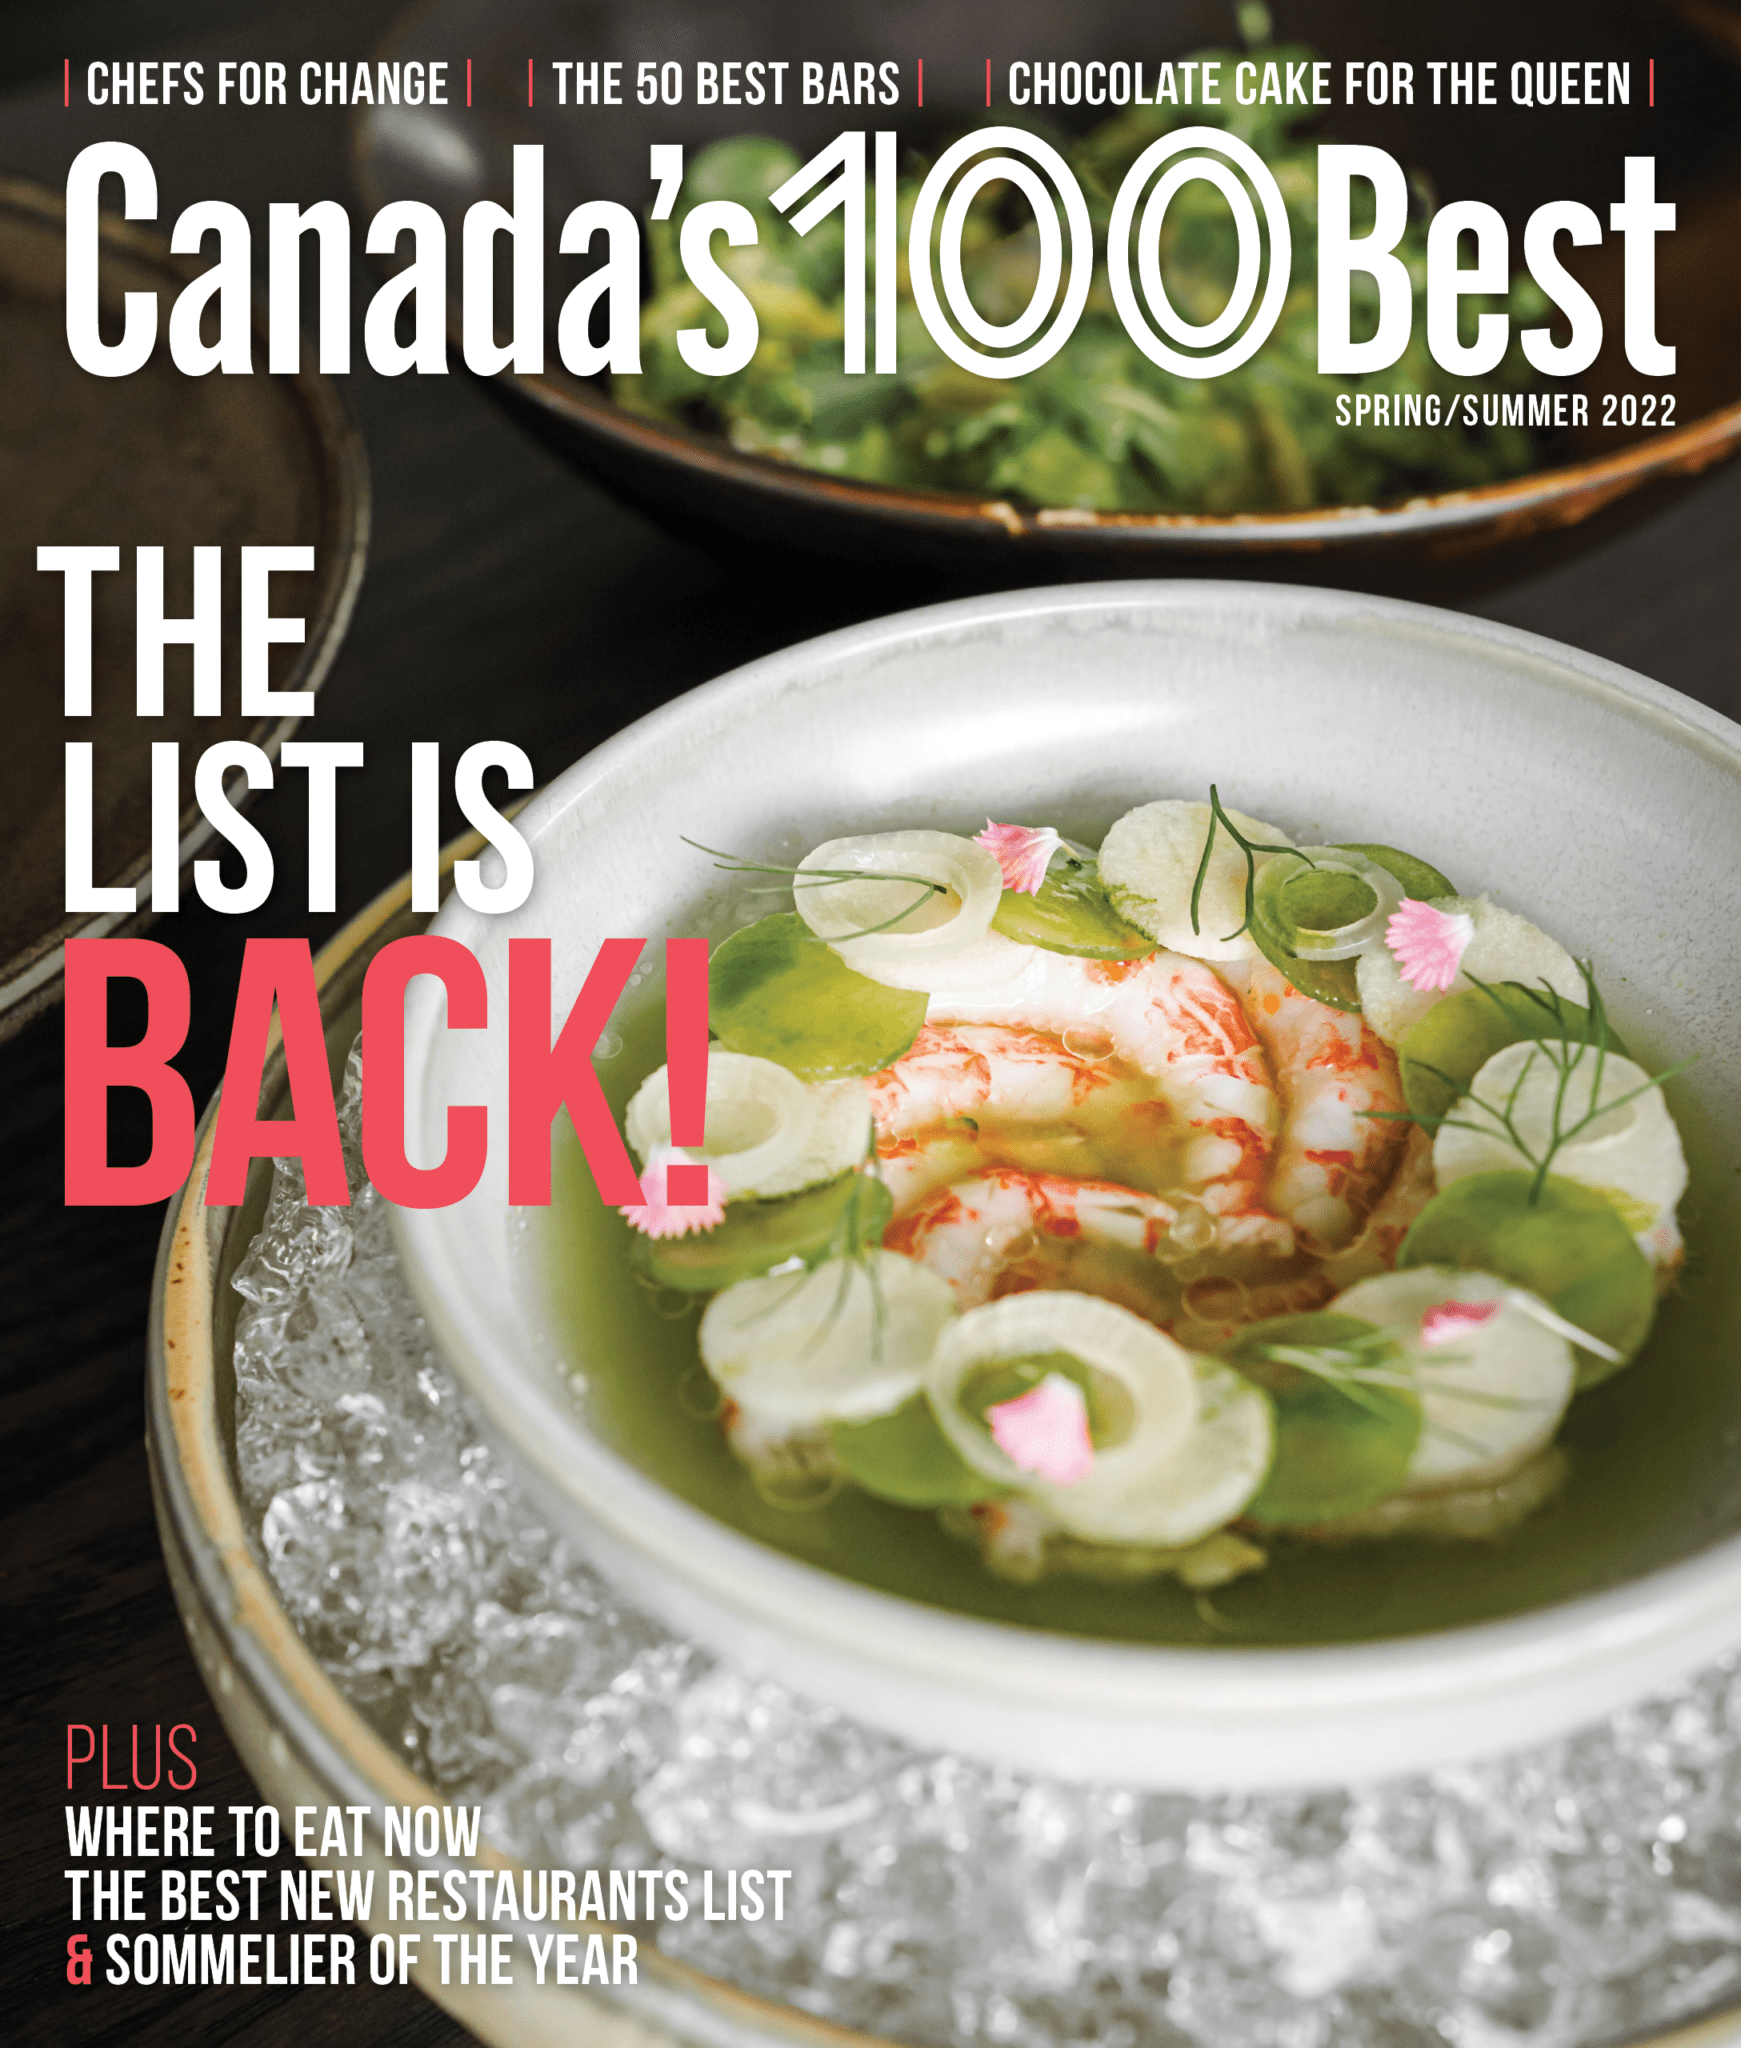 Canada's 100 Best Restaurants, Bars and Chefs. - Where to Buy Canada's 100  Best Restaurants Magazine